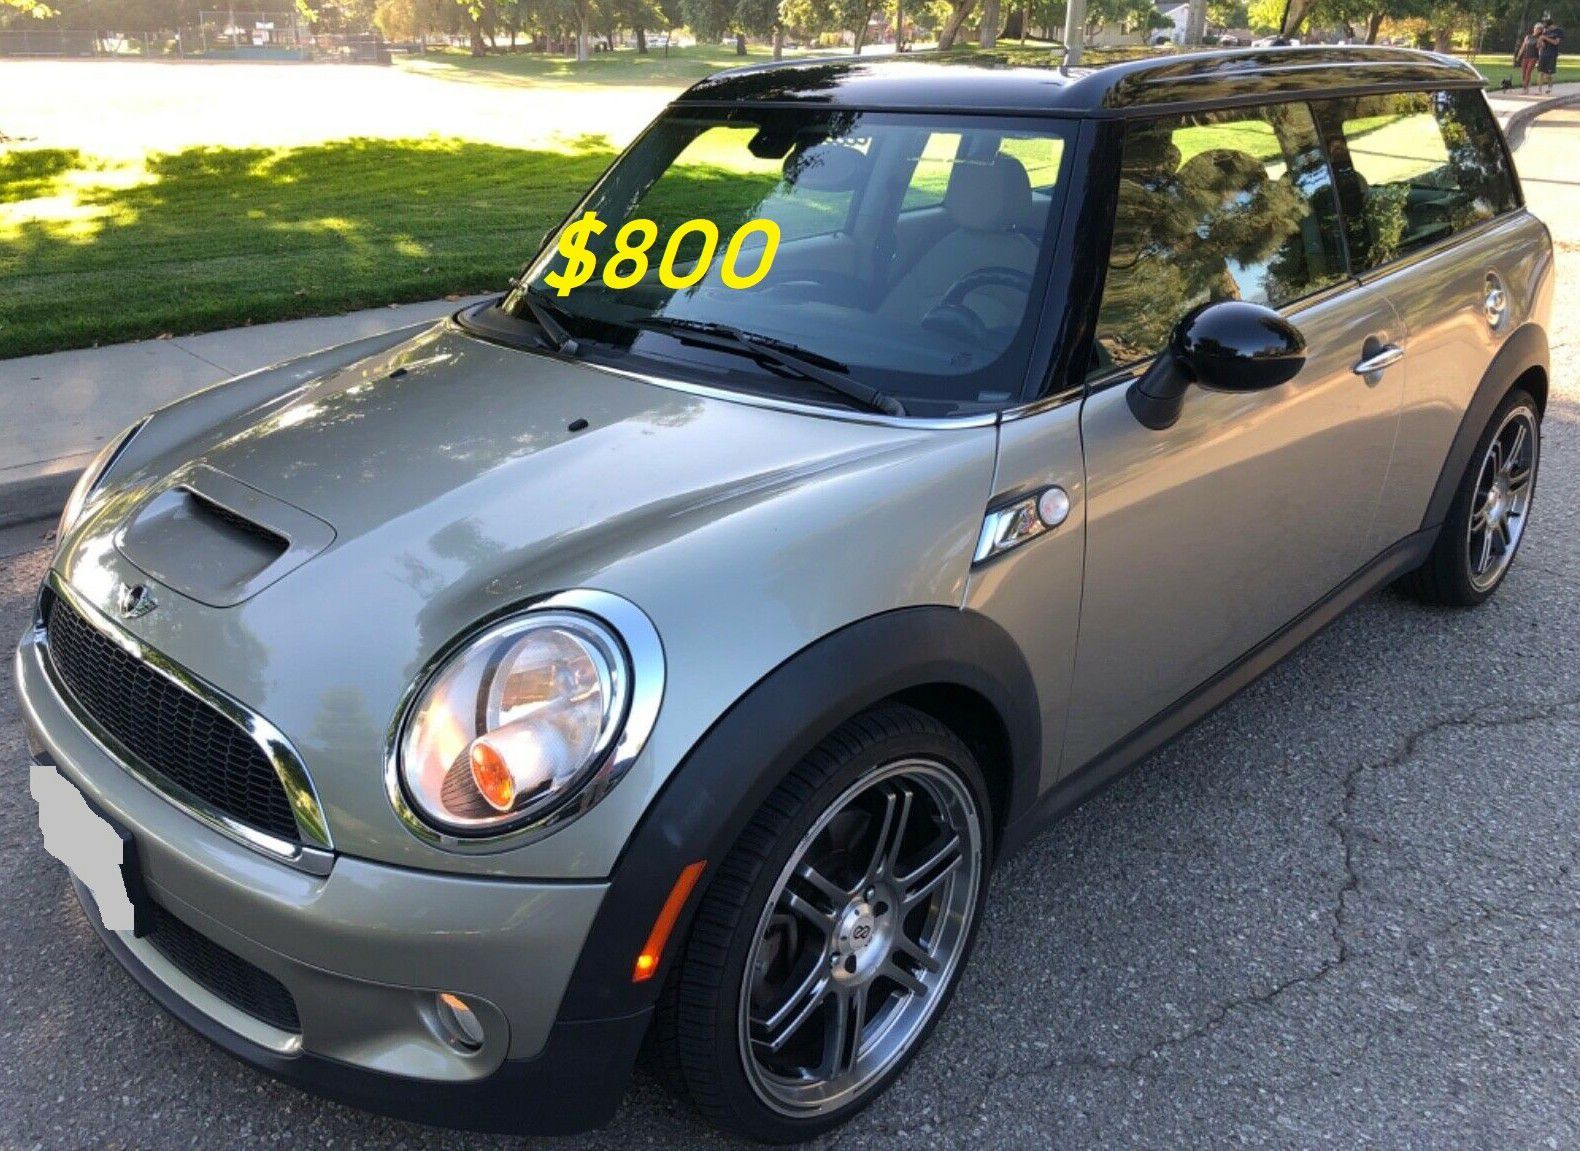 ❇️💲8OO For sale URGENTLY 2OO9 Mini cooper RUNS&DRIVE PERFECT This car is super clean in&out..,...❇️